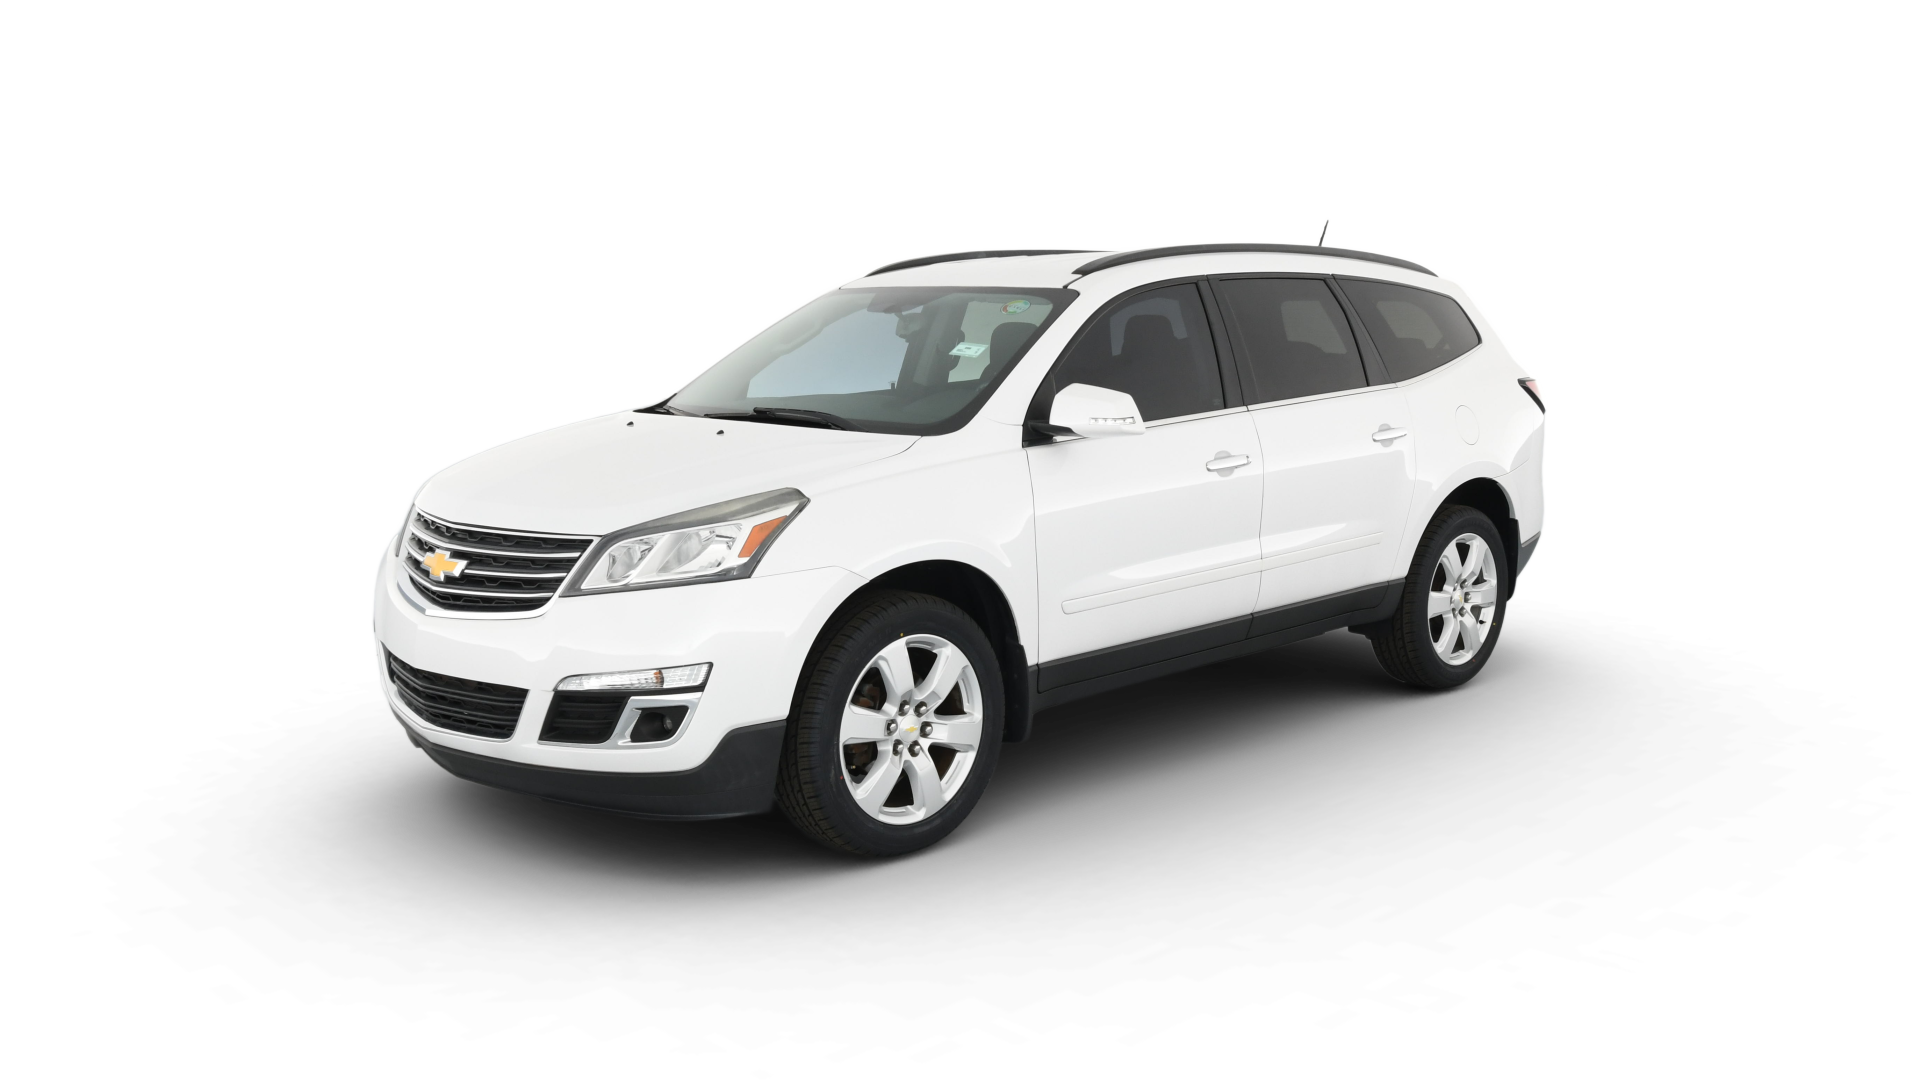 Used 2017 Chevrolet Traverse For Sale Online | Carvana